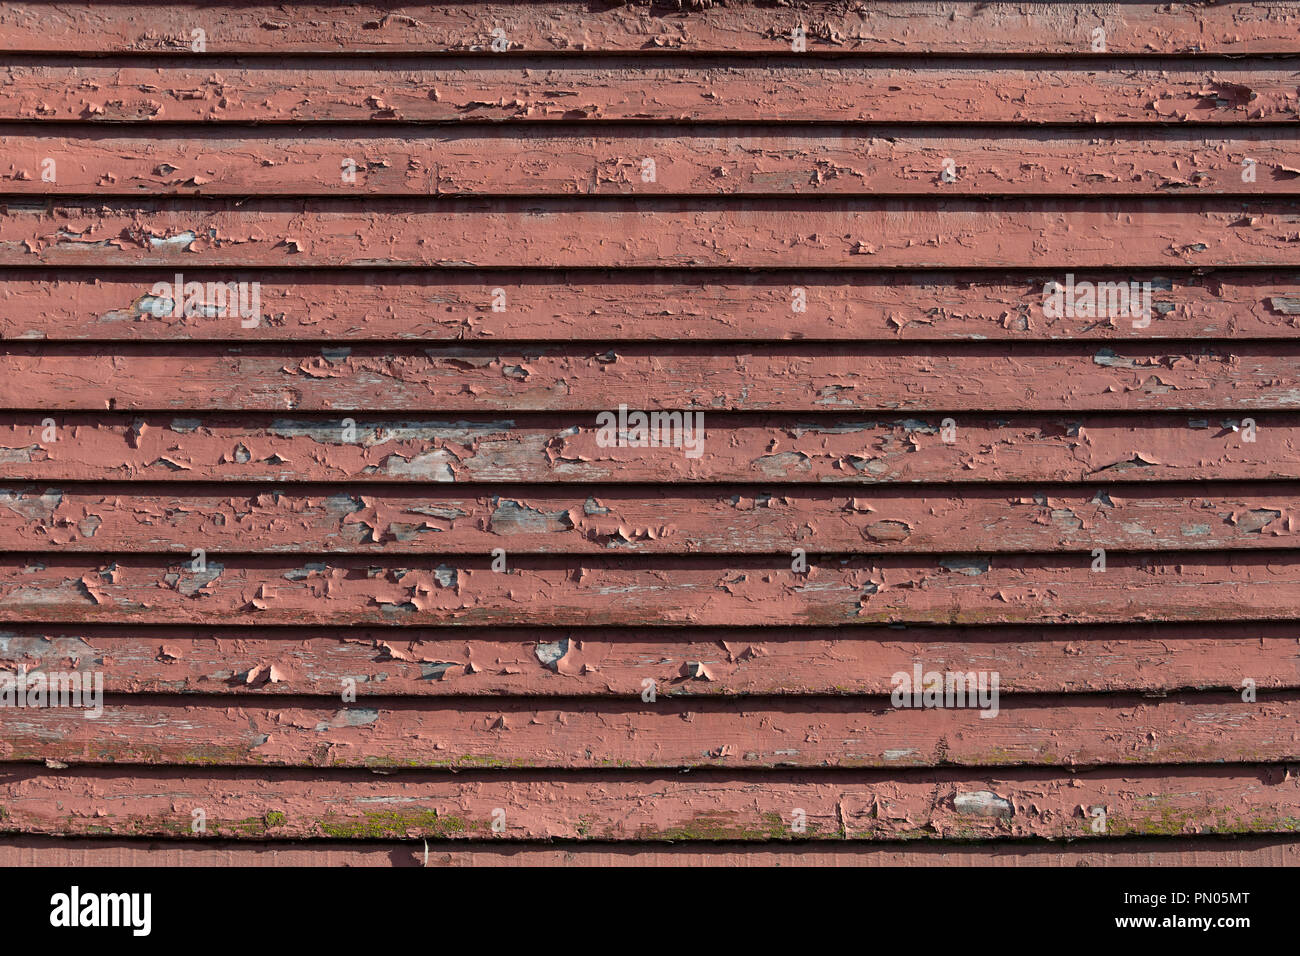 Peeling paint on a house's weather boarding. Would be great for a textured background image. Stock Photo